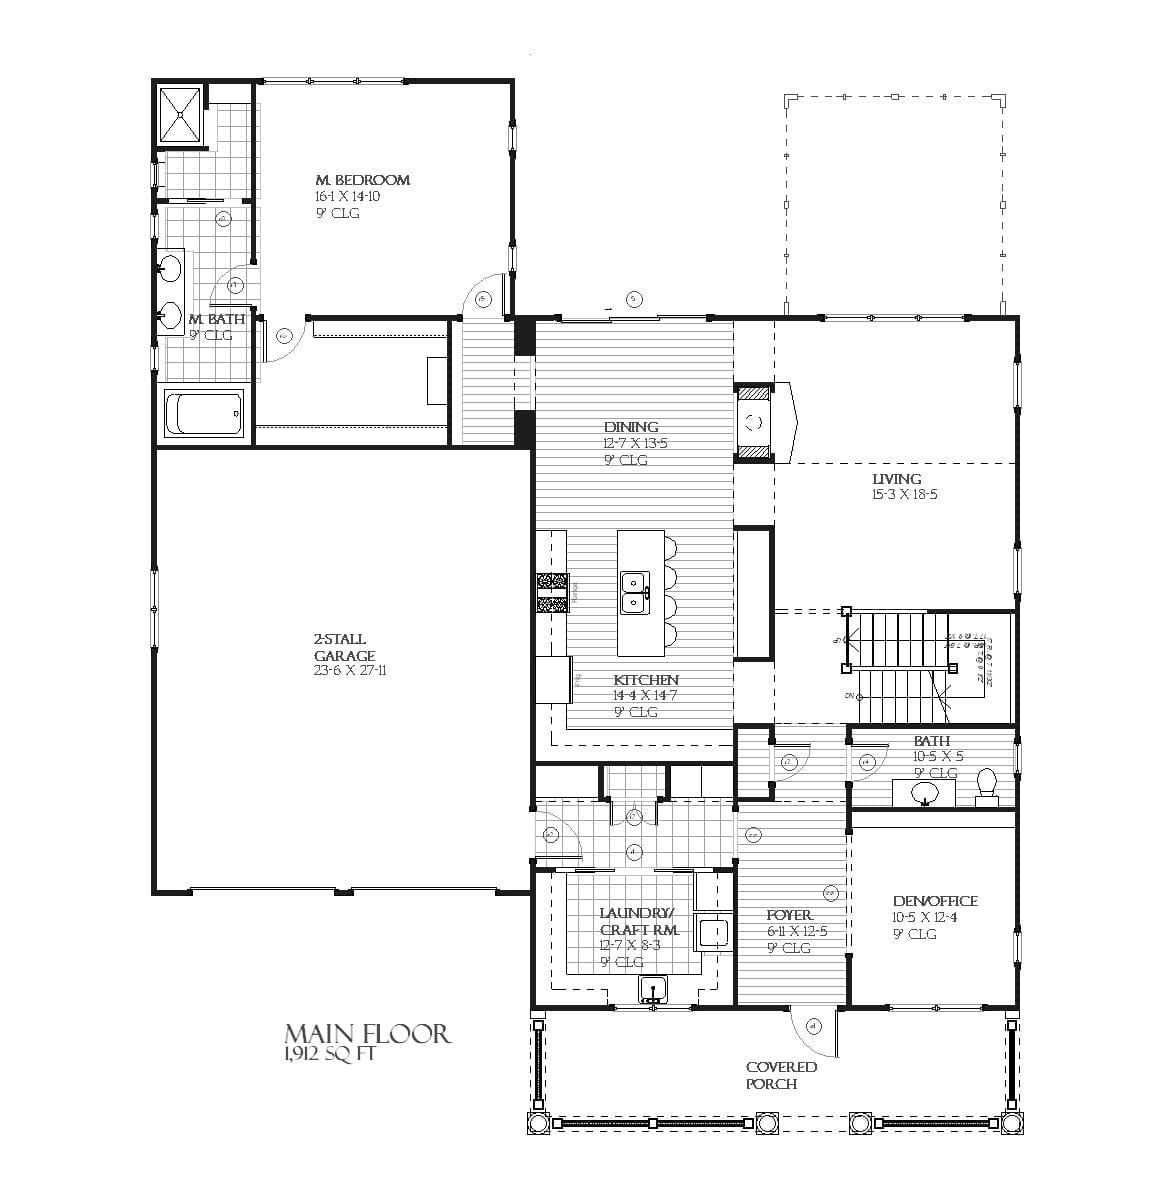 Manhattan - Home Design and Floor Plan - SketchPad House Plans